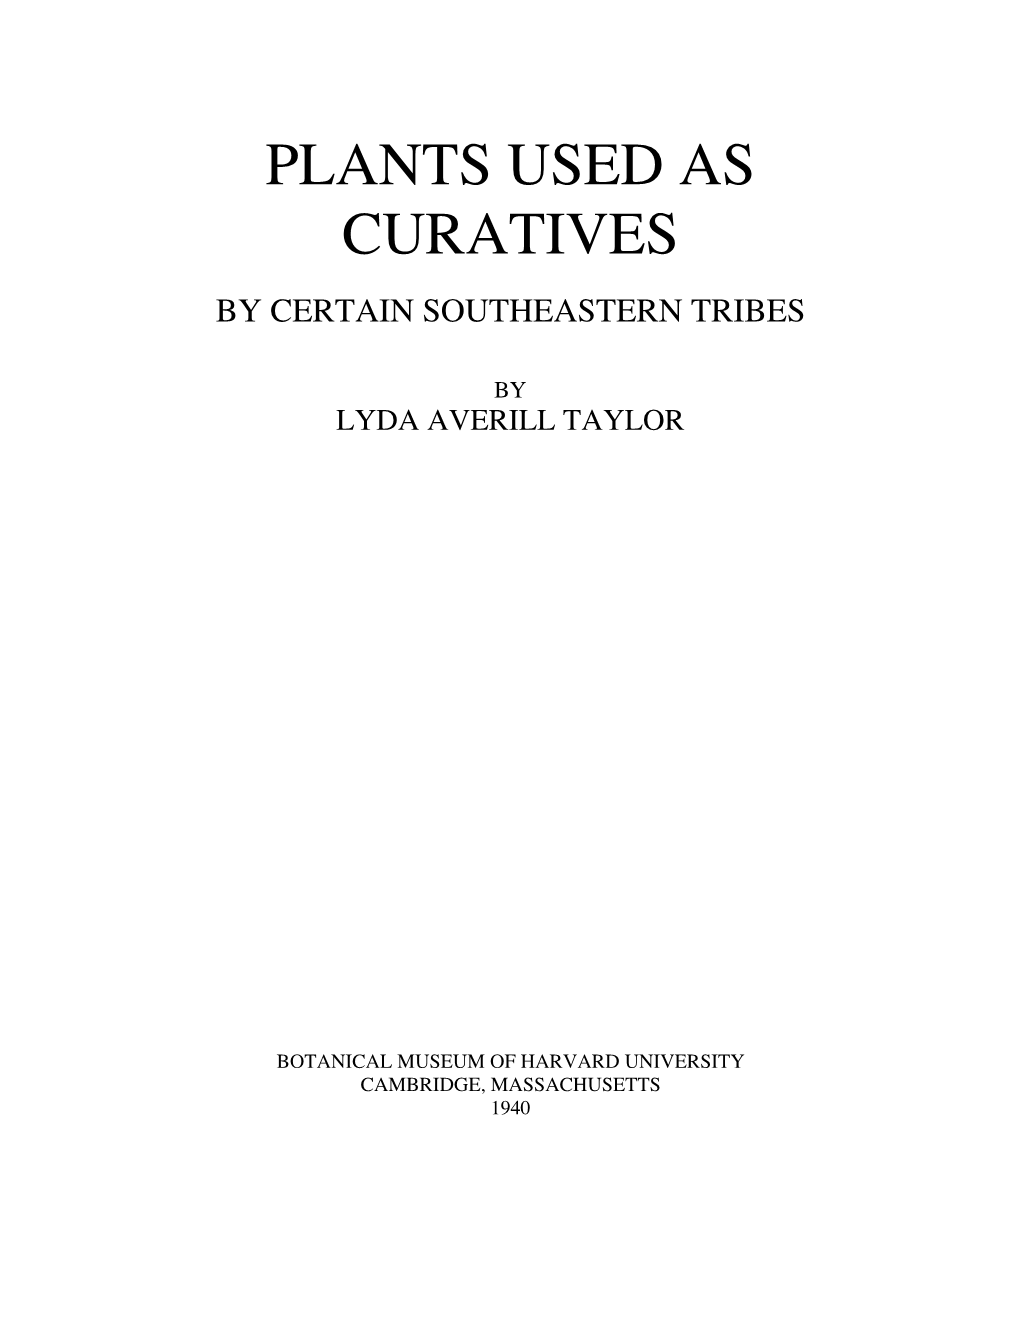 Plants Used As Curatives by Certain Southeastern Tribes